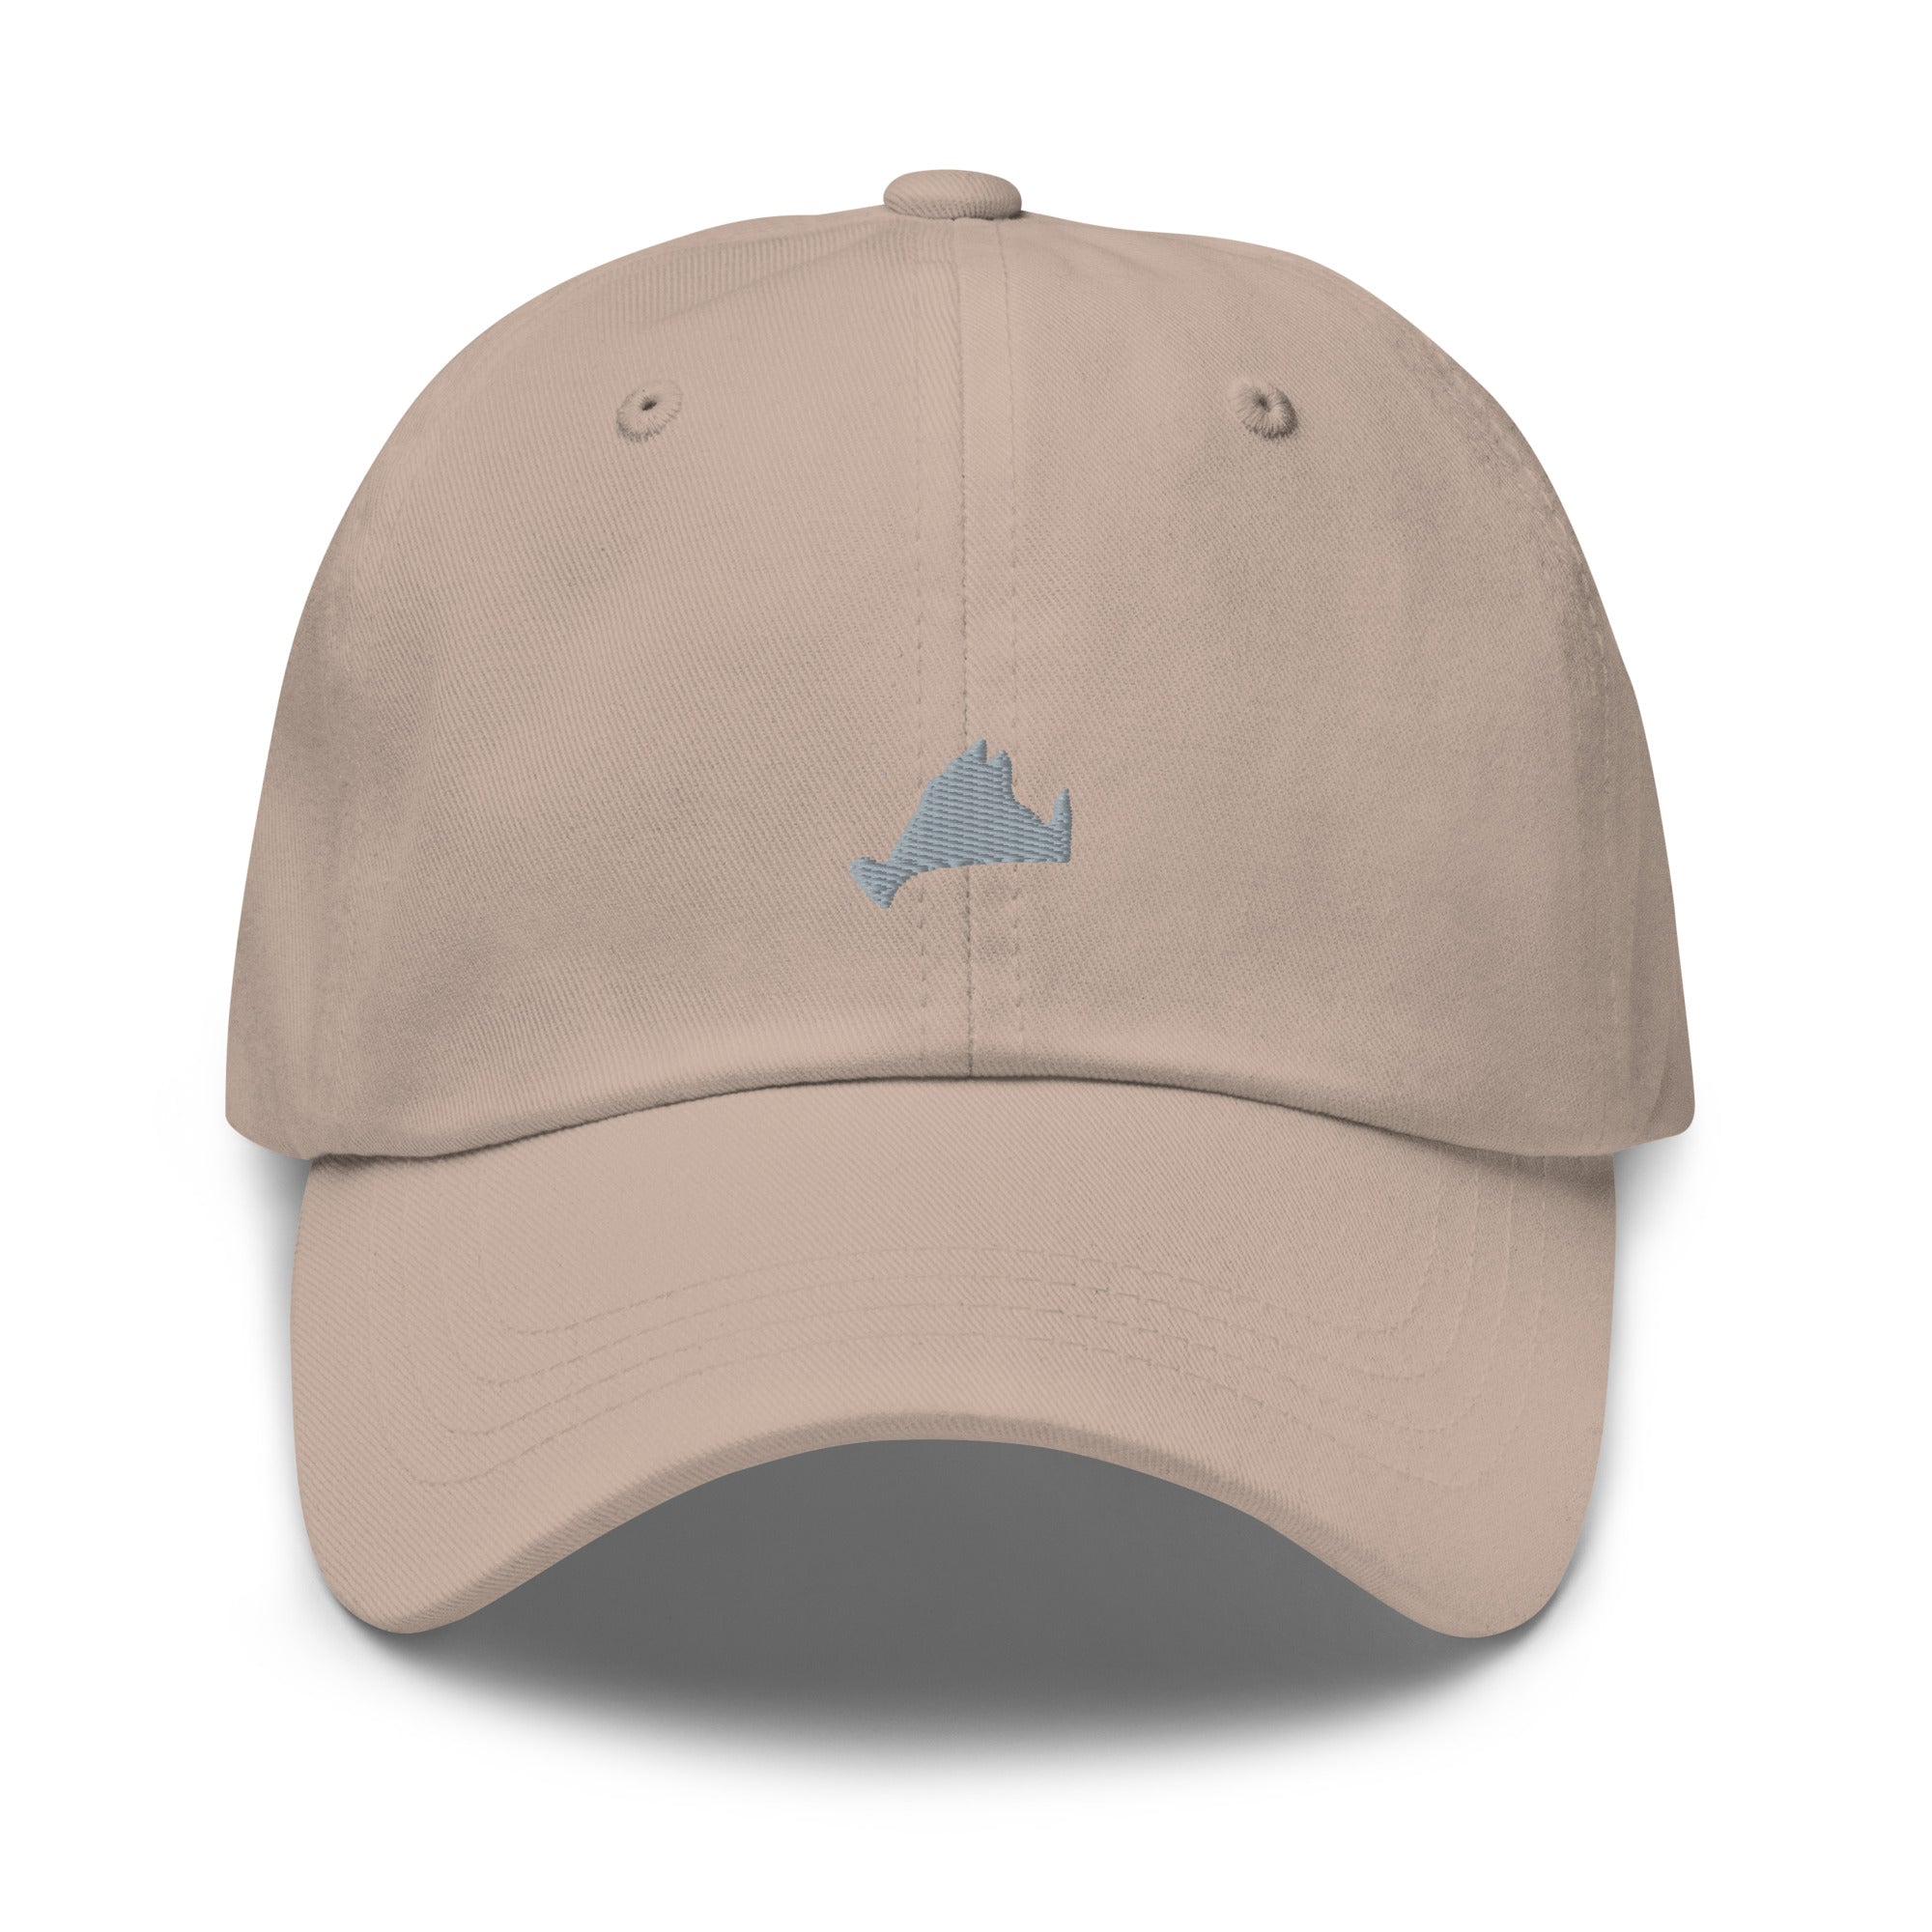 Silver Grey Embroidered Dad hat